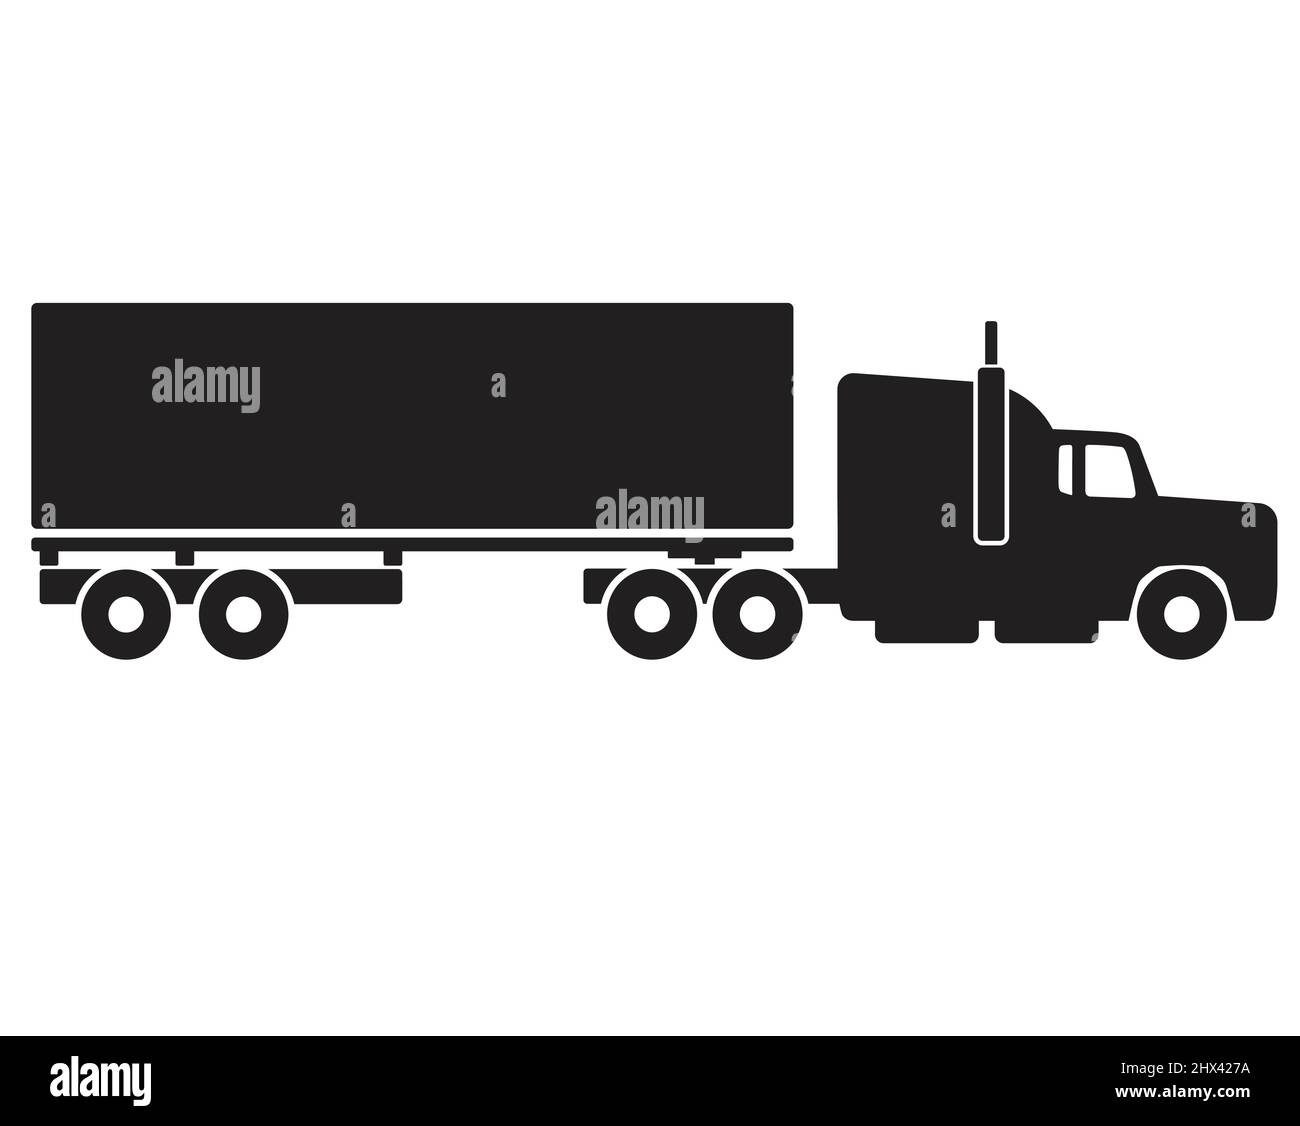 simple semi trailer long nose container truck articulated black silhouette side view icon symbol vector isolated on white background Stock Vector